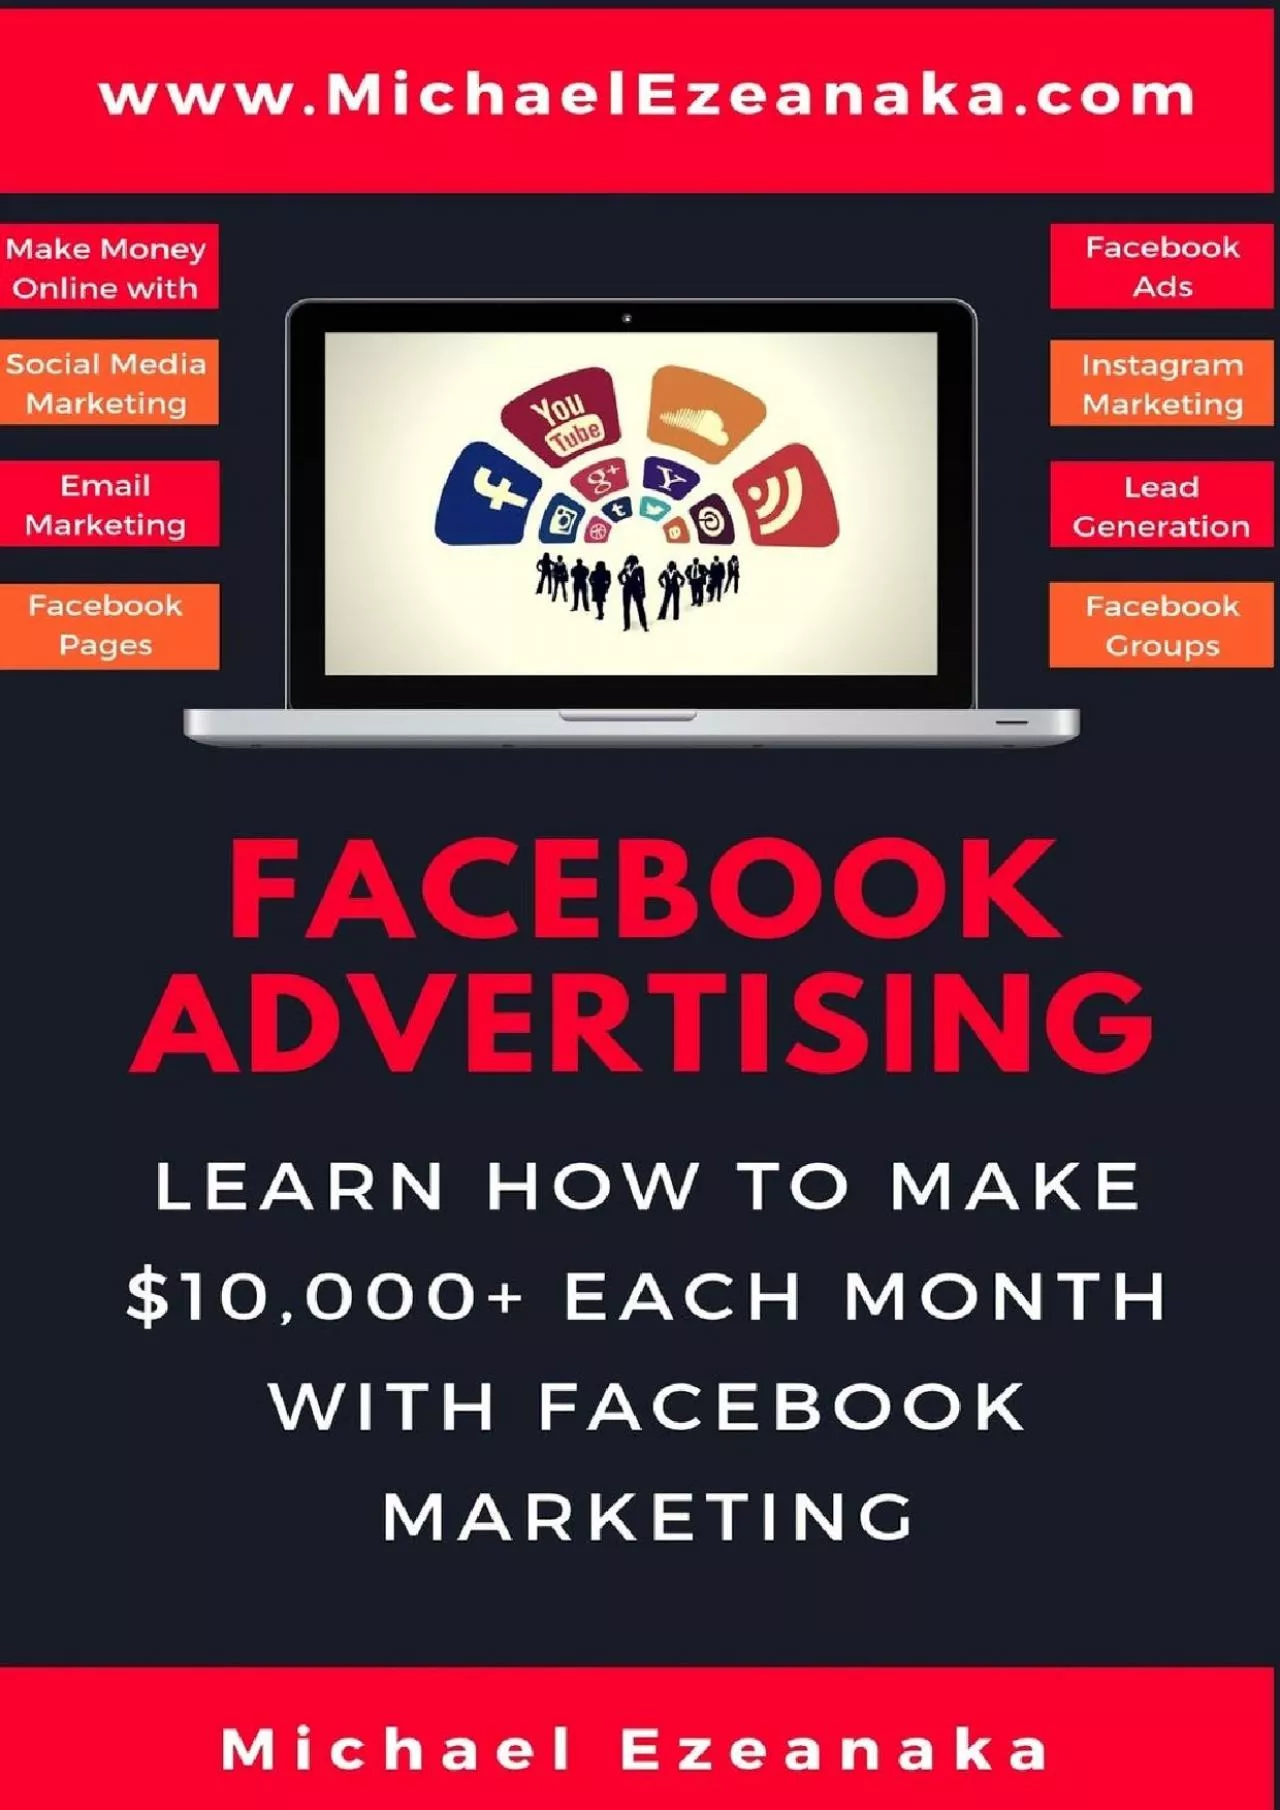 Facebook Advertising: Learn How To Make 10,000+ Each Month With Facebook Marketing (Make